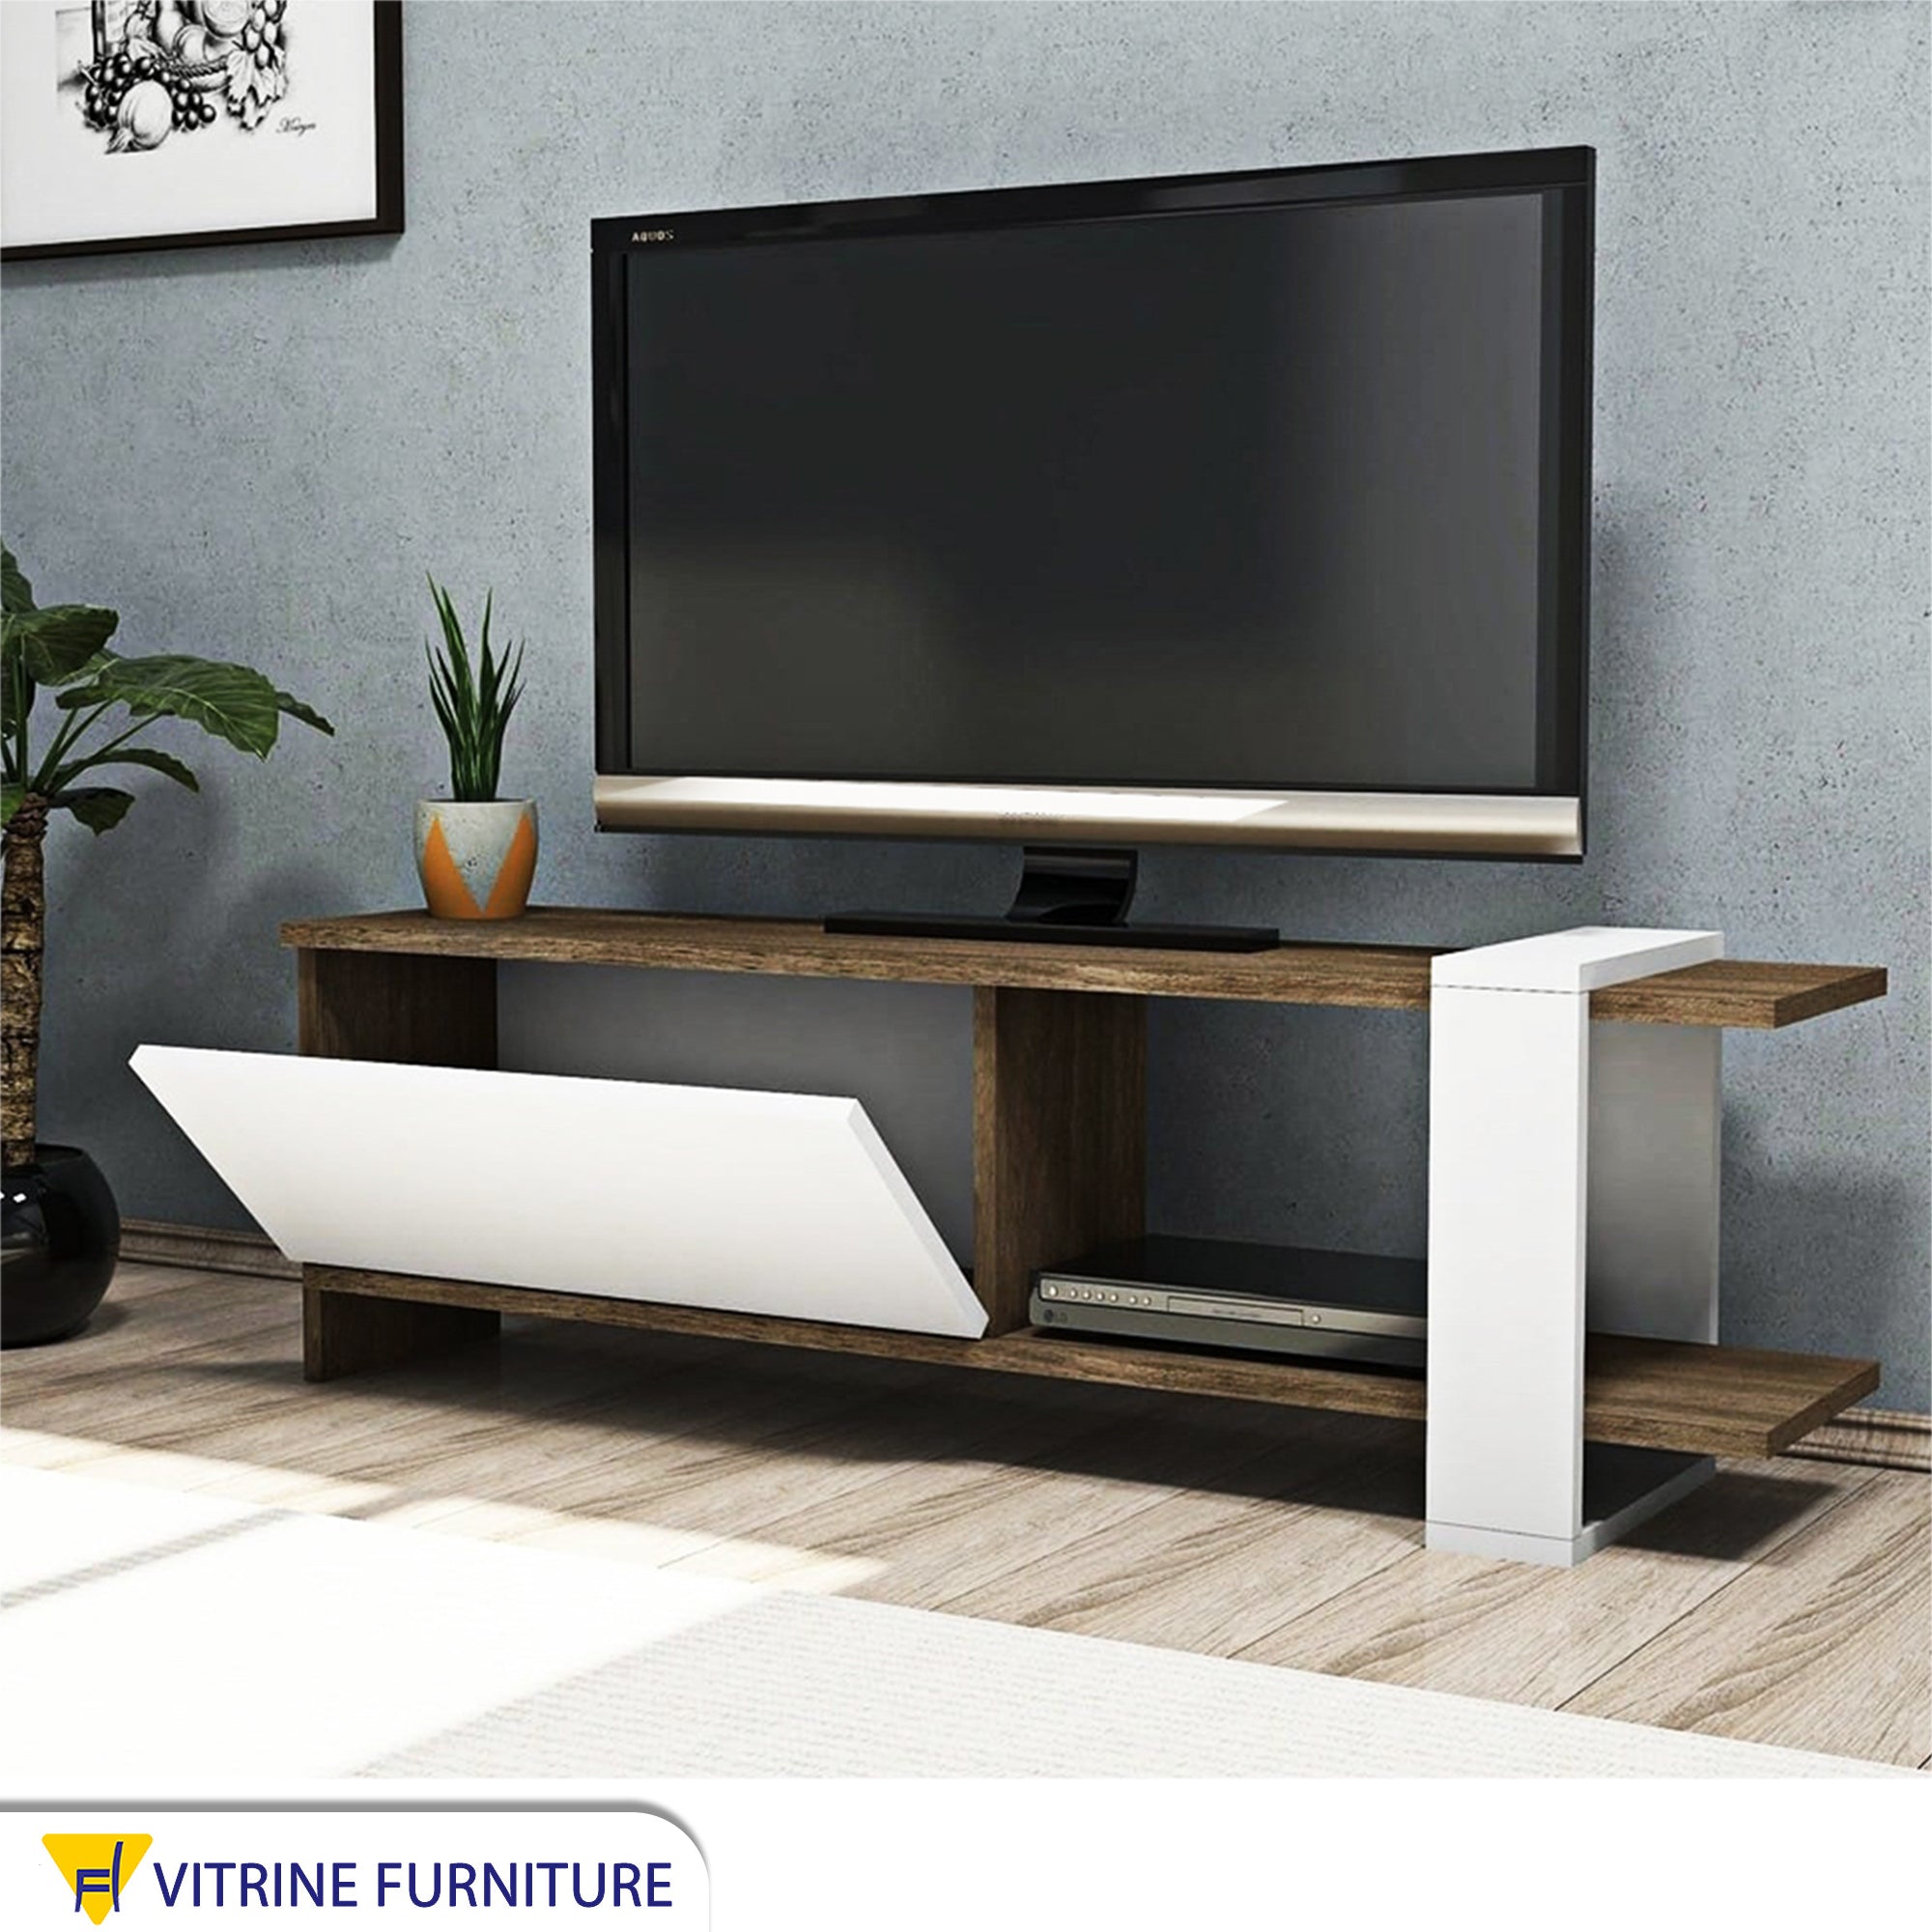 TV table in white and dark brown